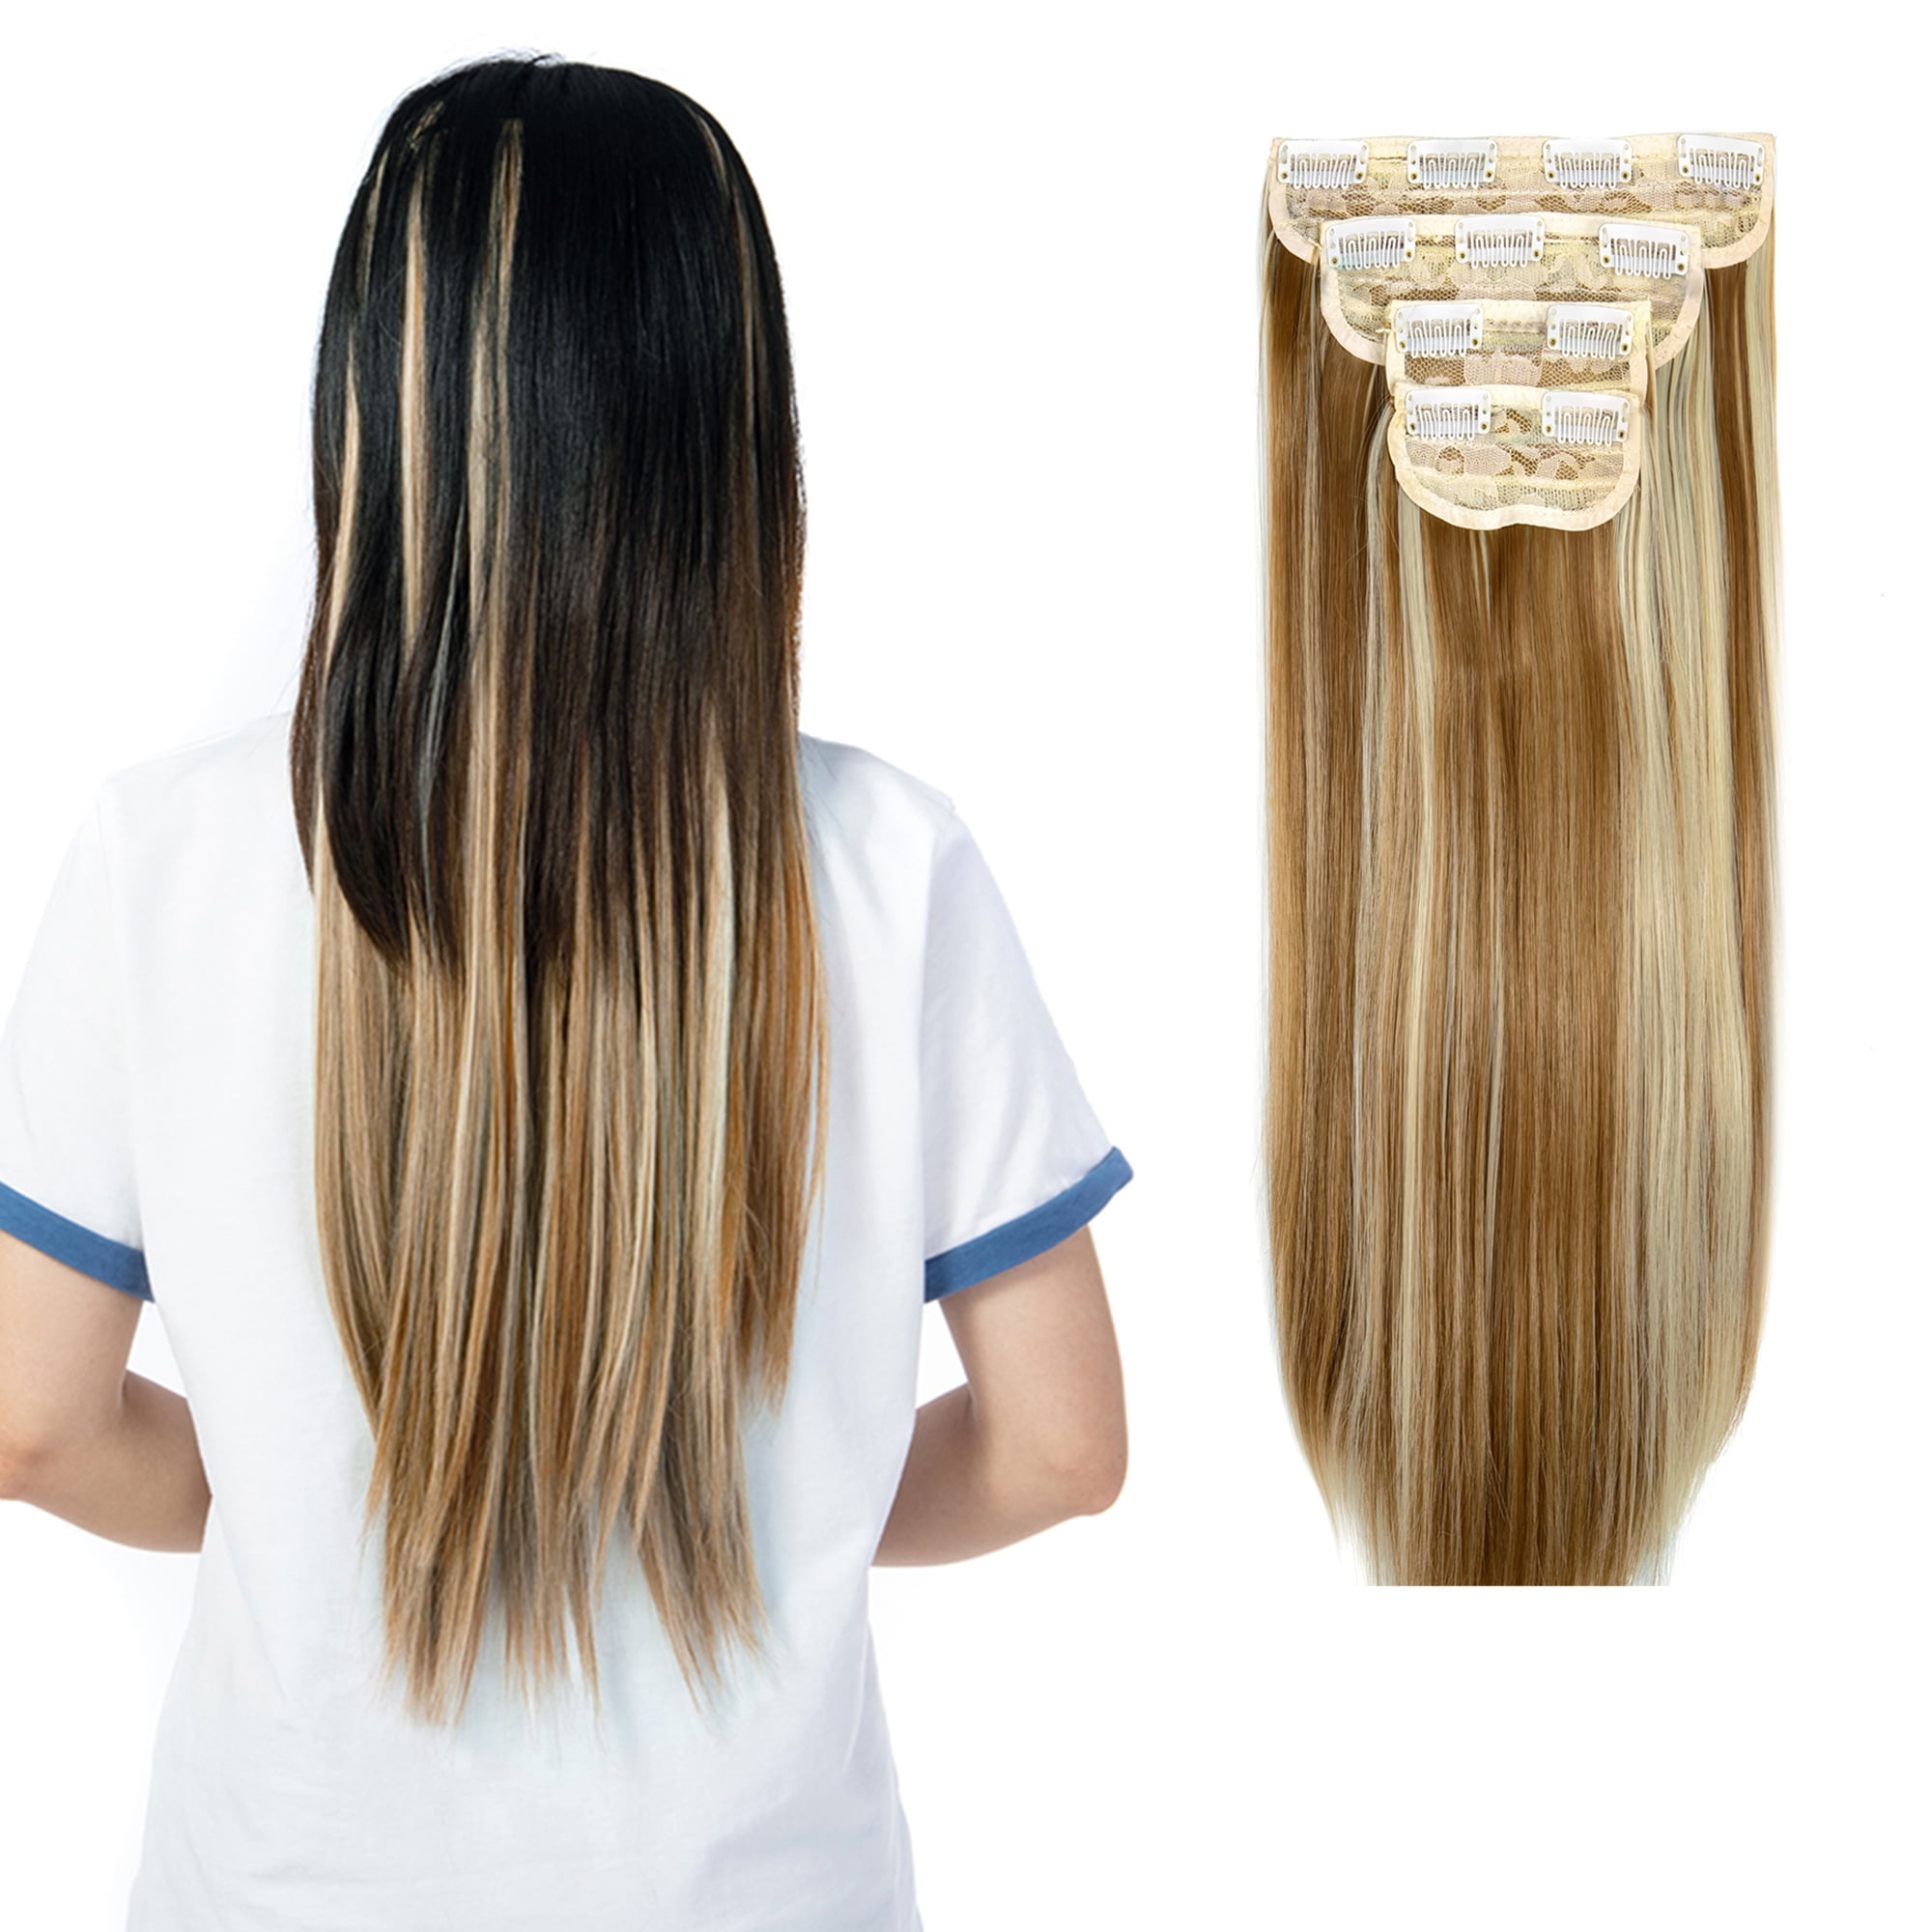 Deago 24 inch 16 Clips Full Head Long Straight Clips in on Synthetic Hair  Extensions Hair 6 pieces for Women Bleach Blonde